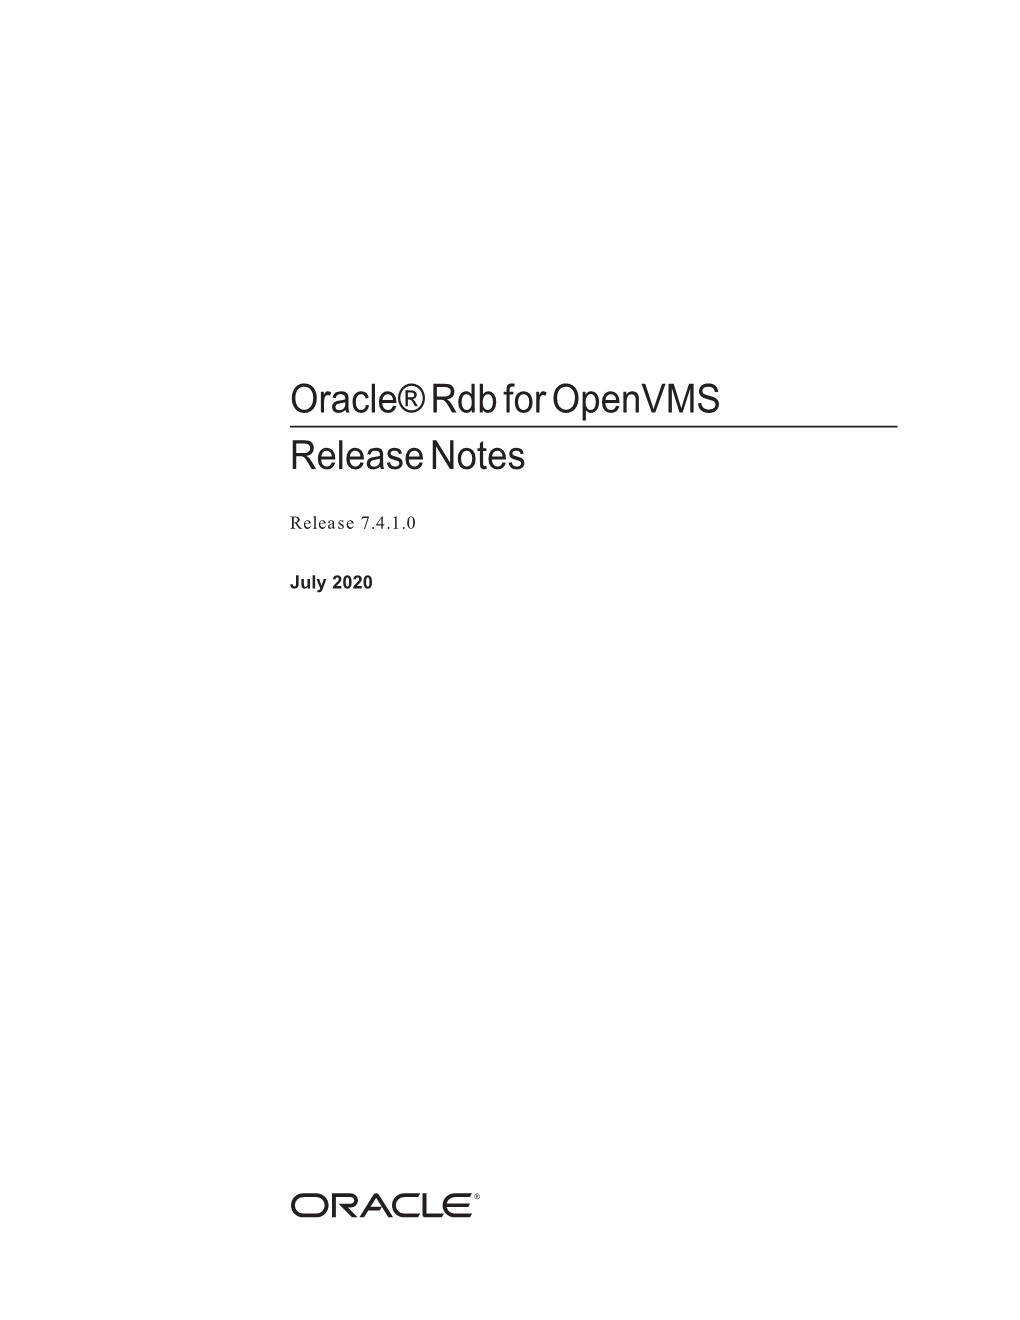 Oracle Rdb for Openvms Release Notes, Release 7.4.1.0